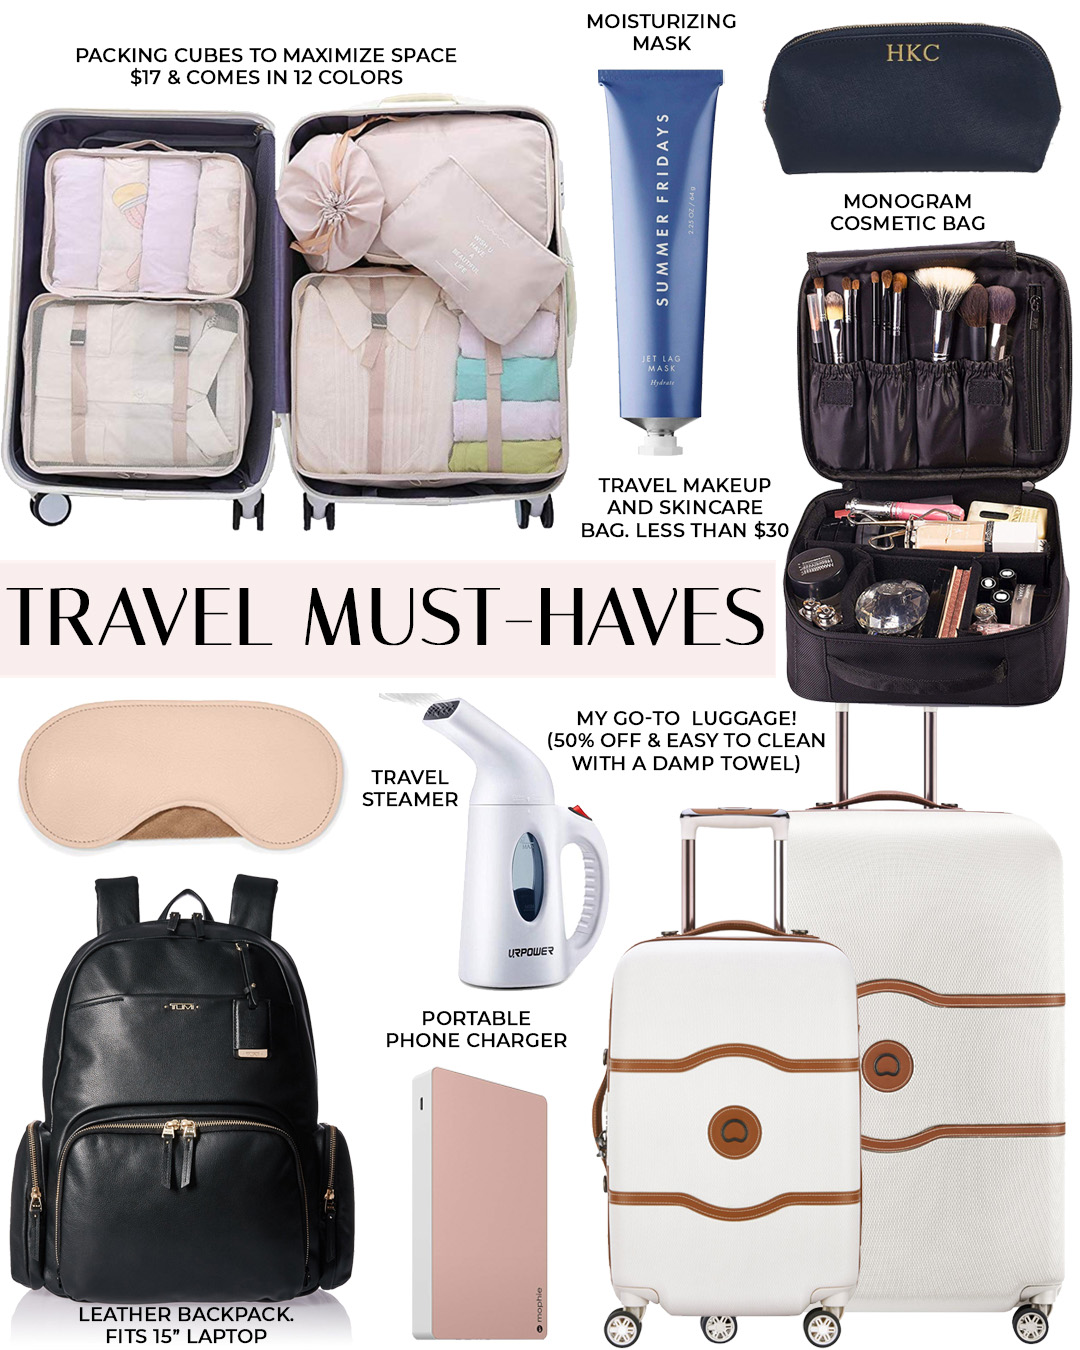 Travel must haves including a leather backpack for work, lightweight luggage, packing cubes, makeup bag and more